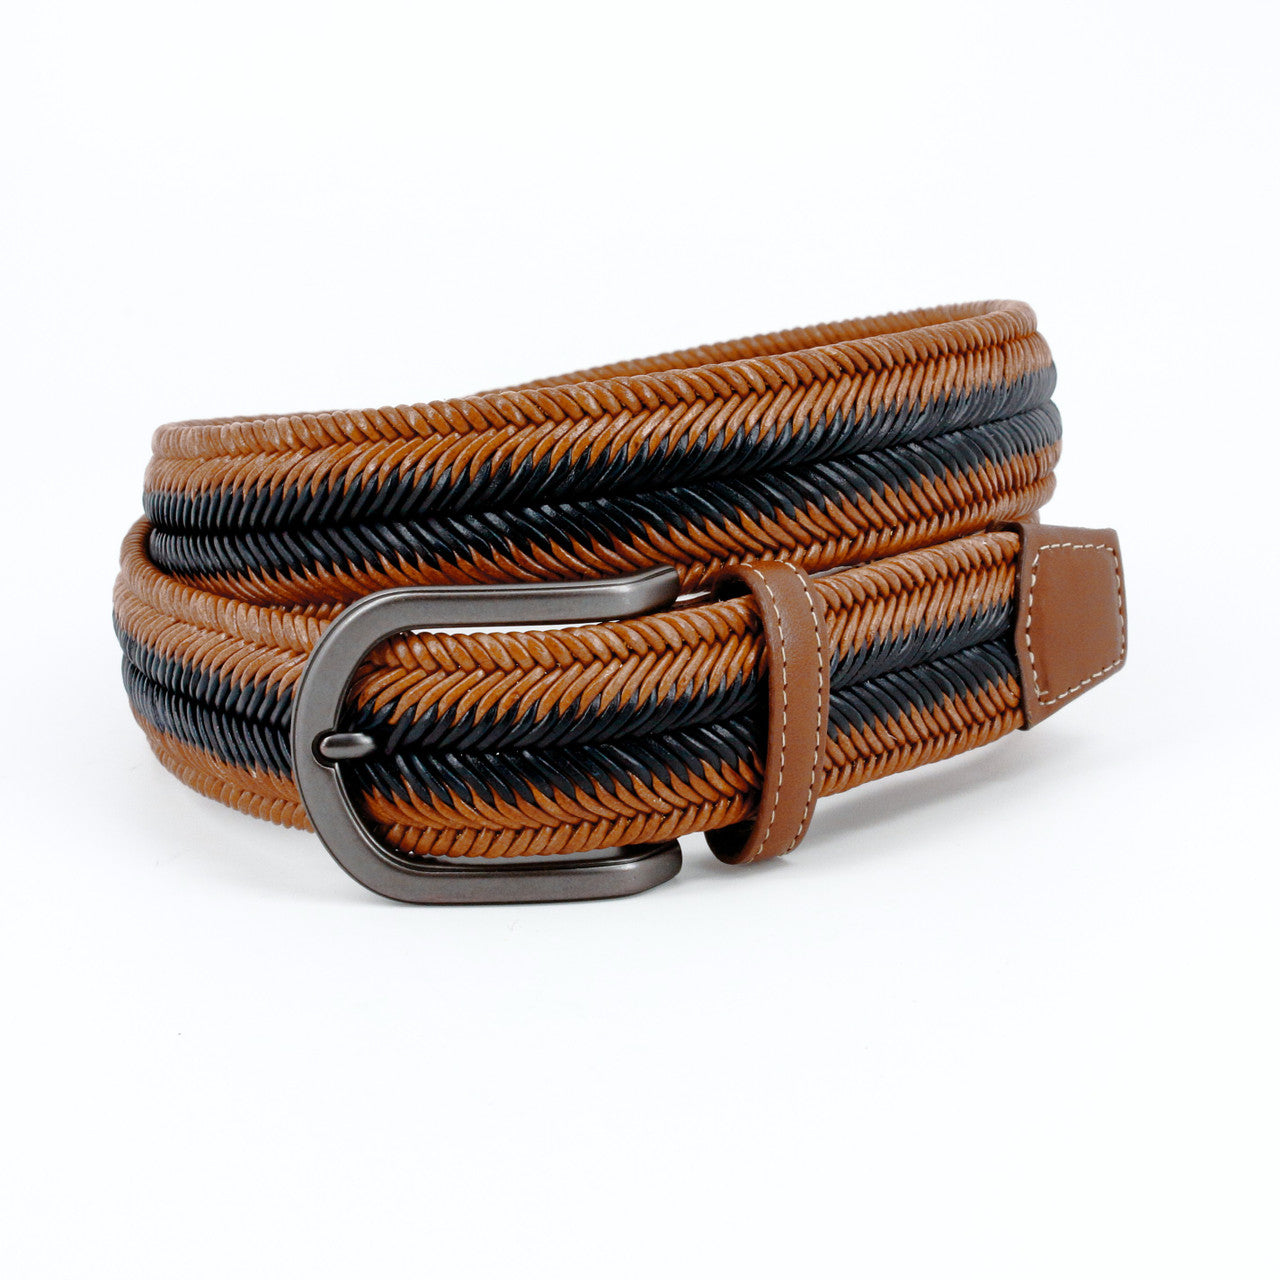 Italian Woven Herringbone Stretch Leather Belt in Saddle and Navy by T